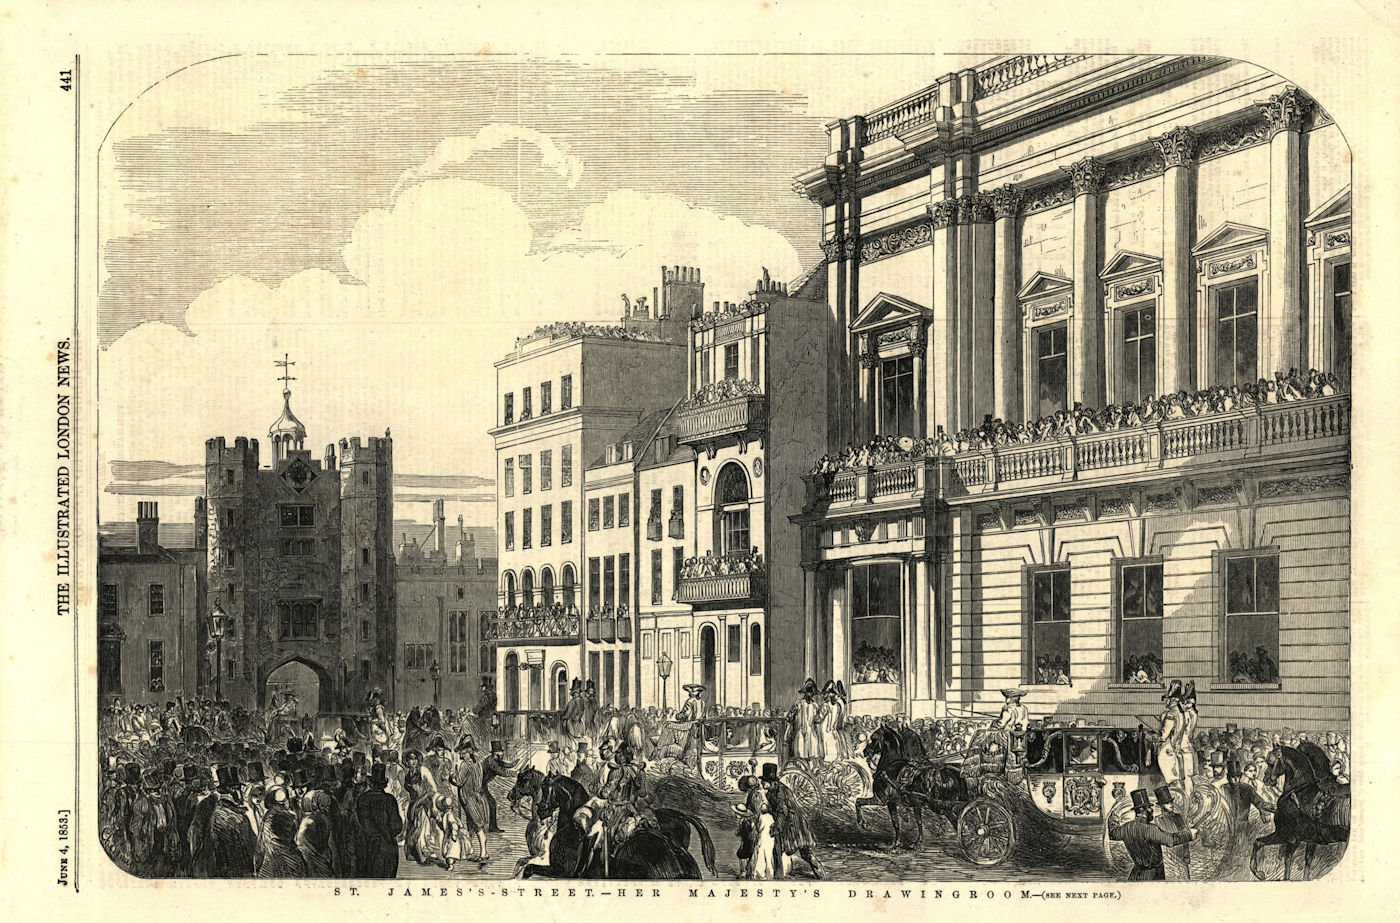 St. James's Street - Her Majesty's drawing room. London 1853 old antique print